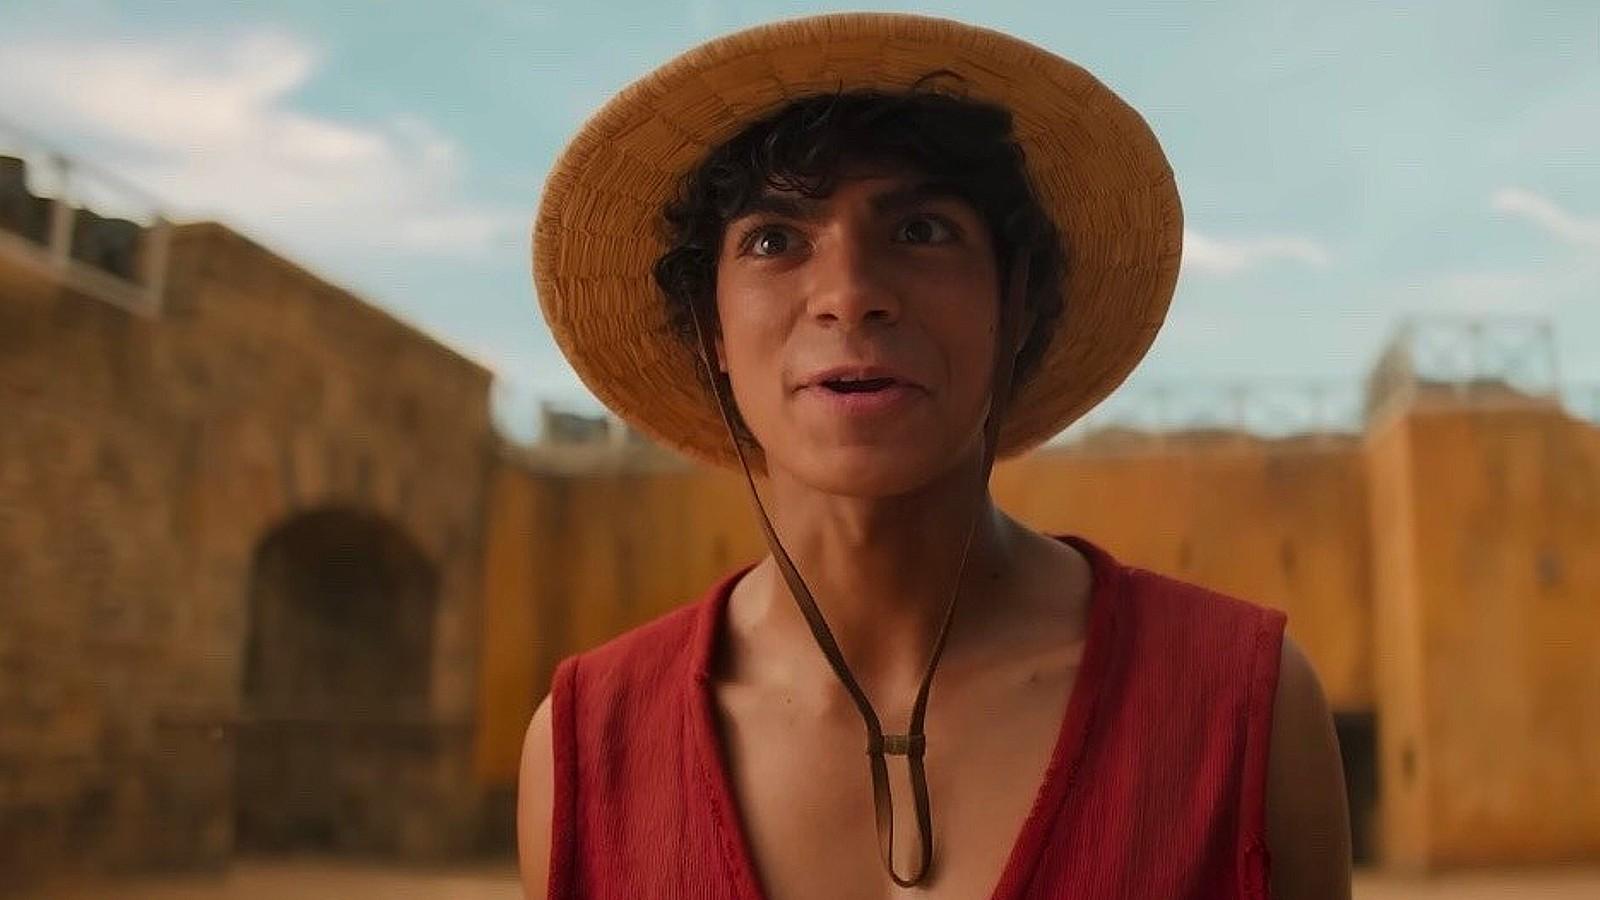 Monkey D. Luffy in the One Piece live-action, new on Netflix in August 2023